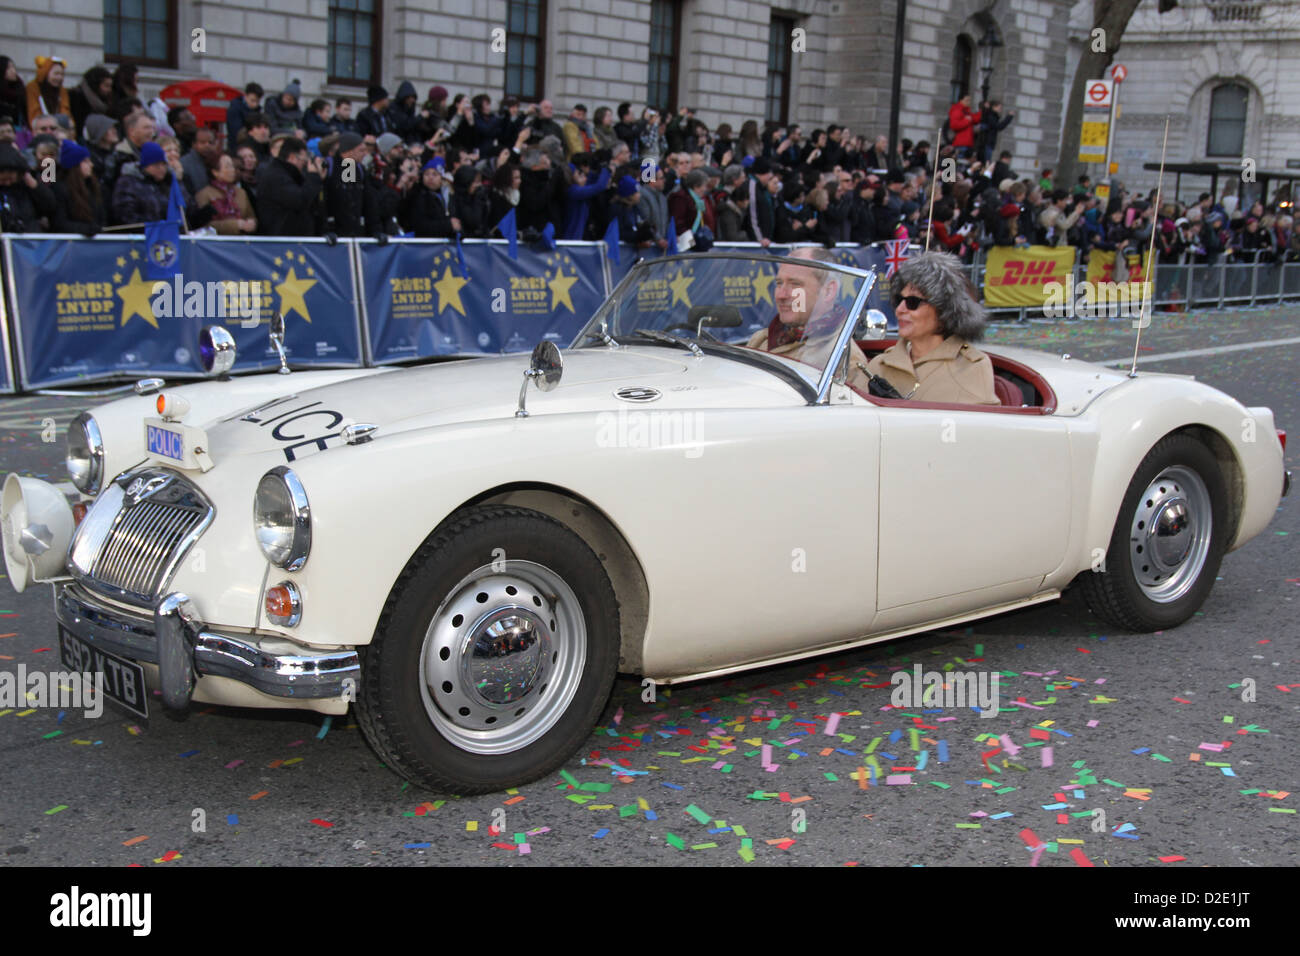 Model: MGA 1600 Year: 1959 Force: Lancashire County Constabulary at the 2013 New Years day Parade in London. Stock Photo